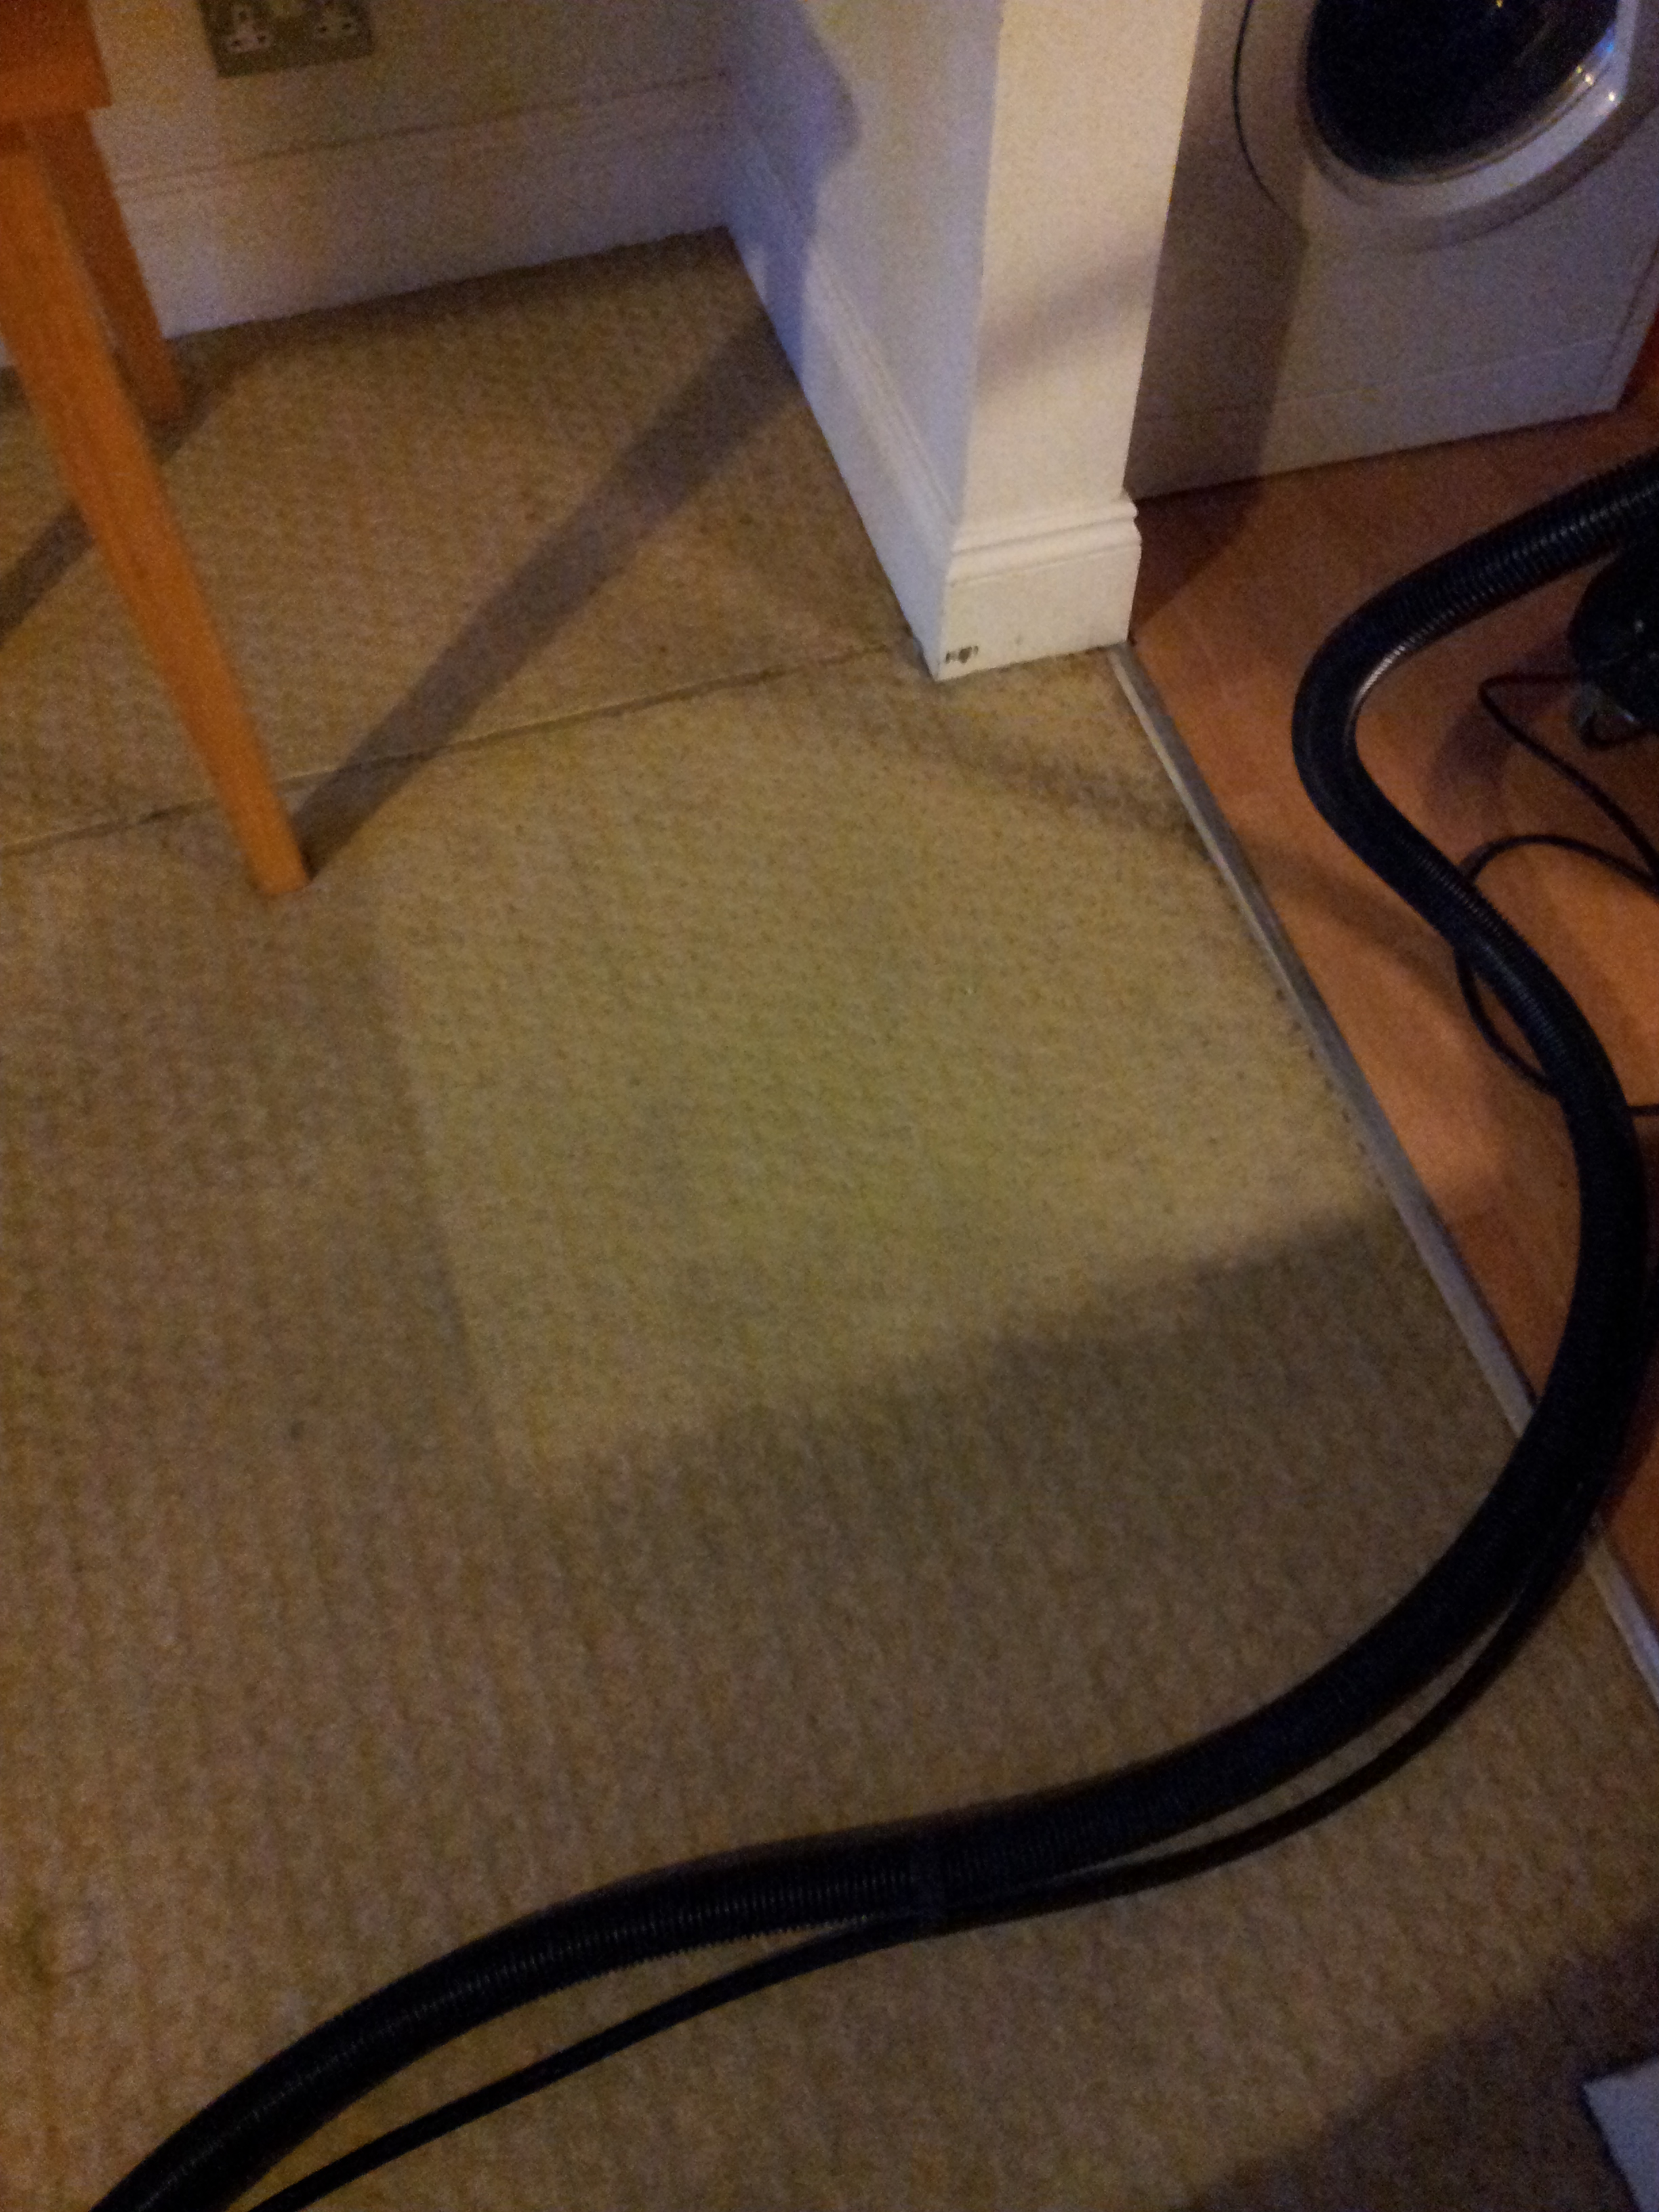 Sample area of carpet clean shown to customer